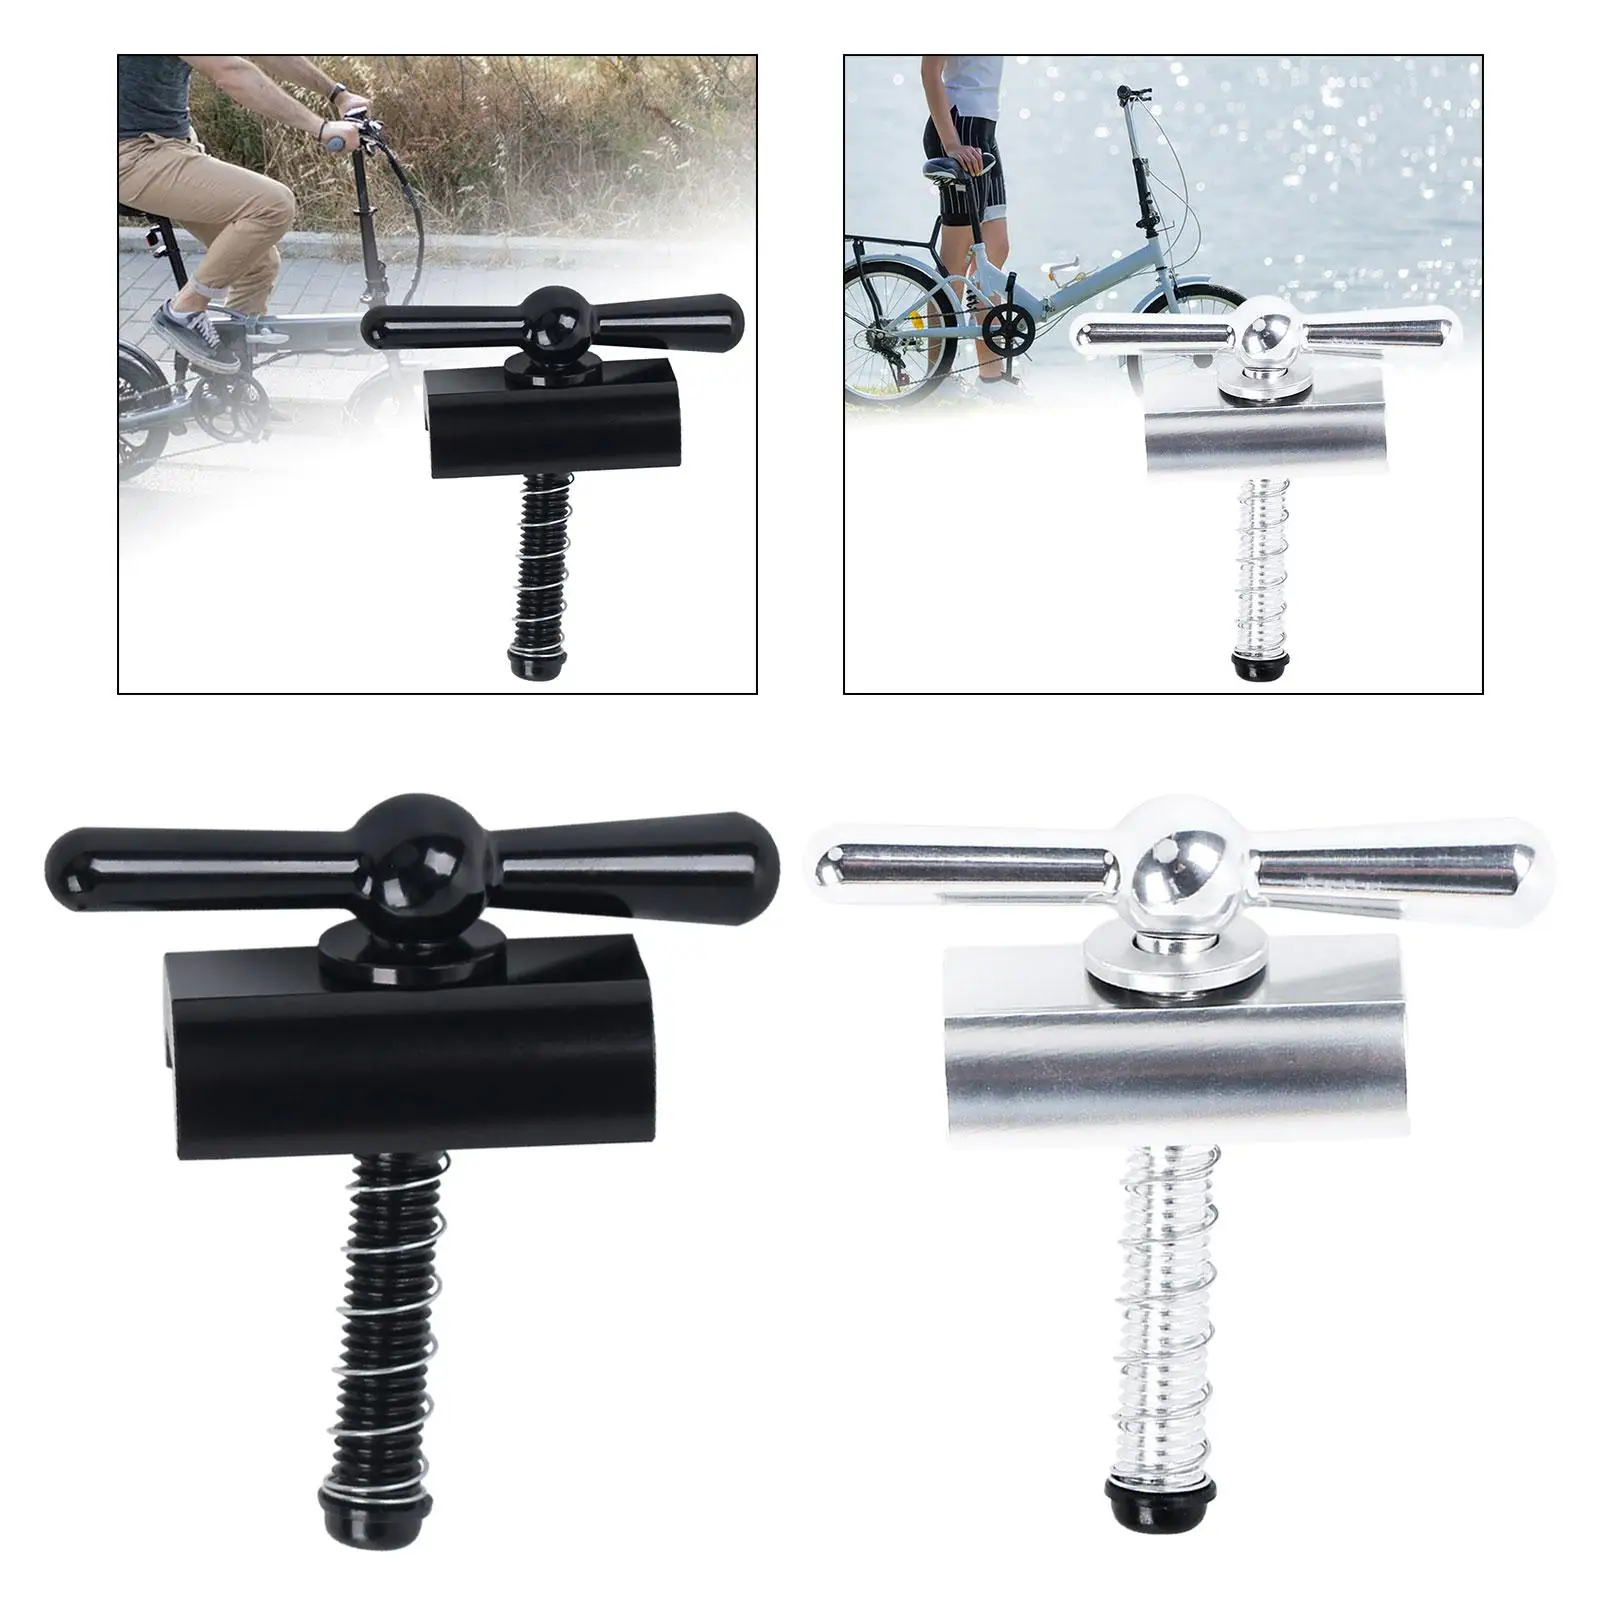 Folding Bike Hinge Clamp Hinge Clamp Plate Foldable Bicycle Accessories for Headset